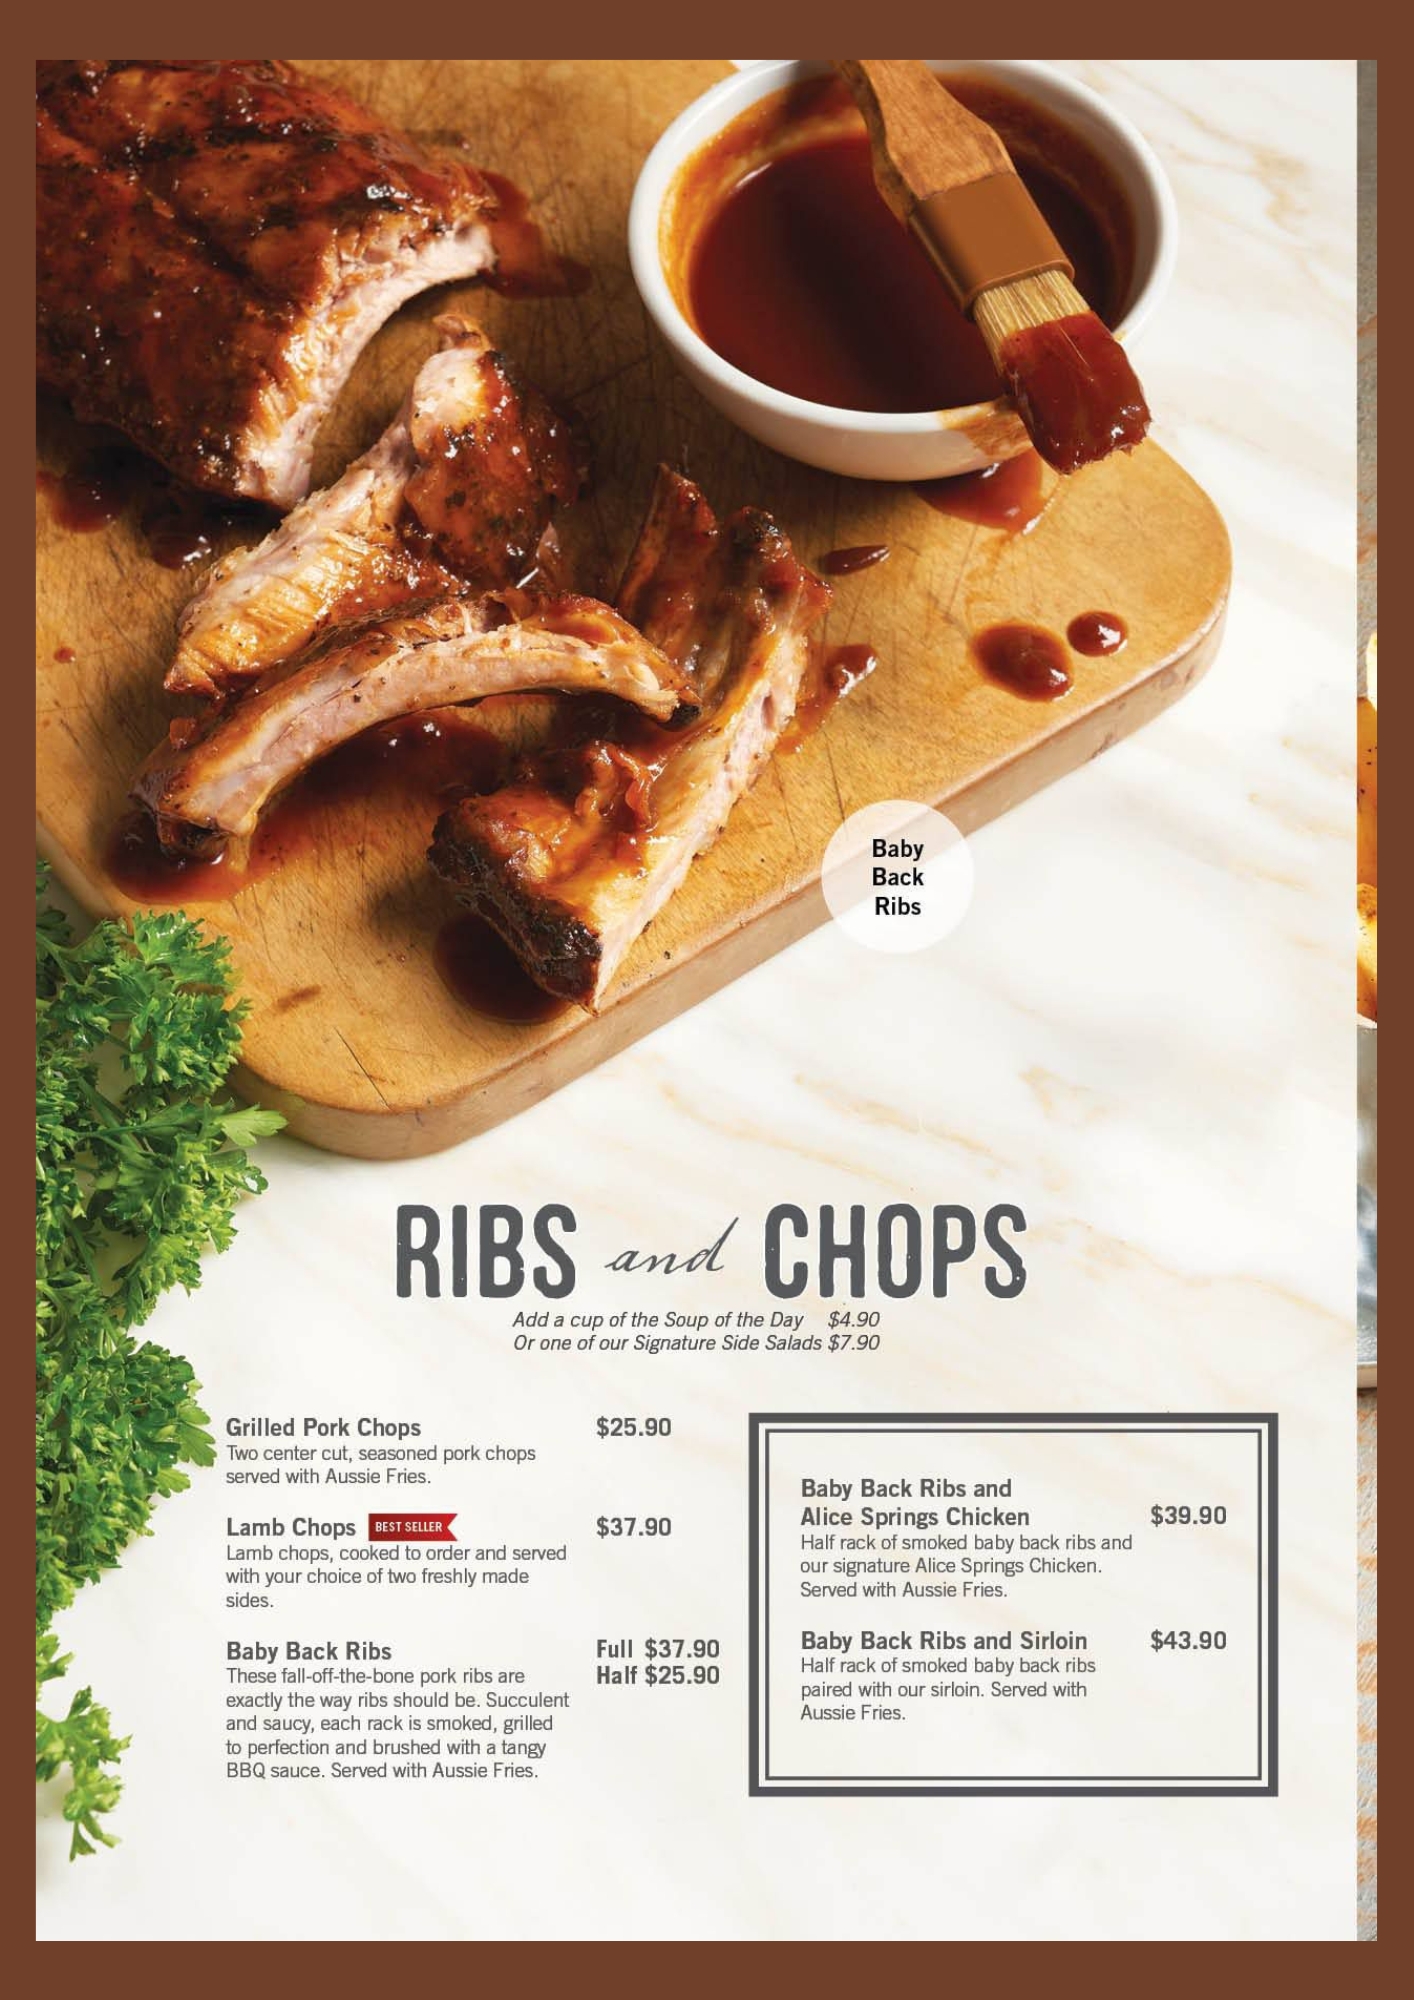 Outback Steakhouse Ribs